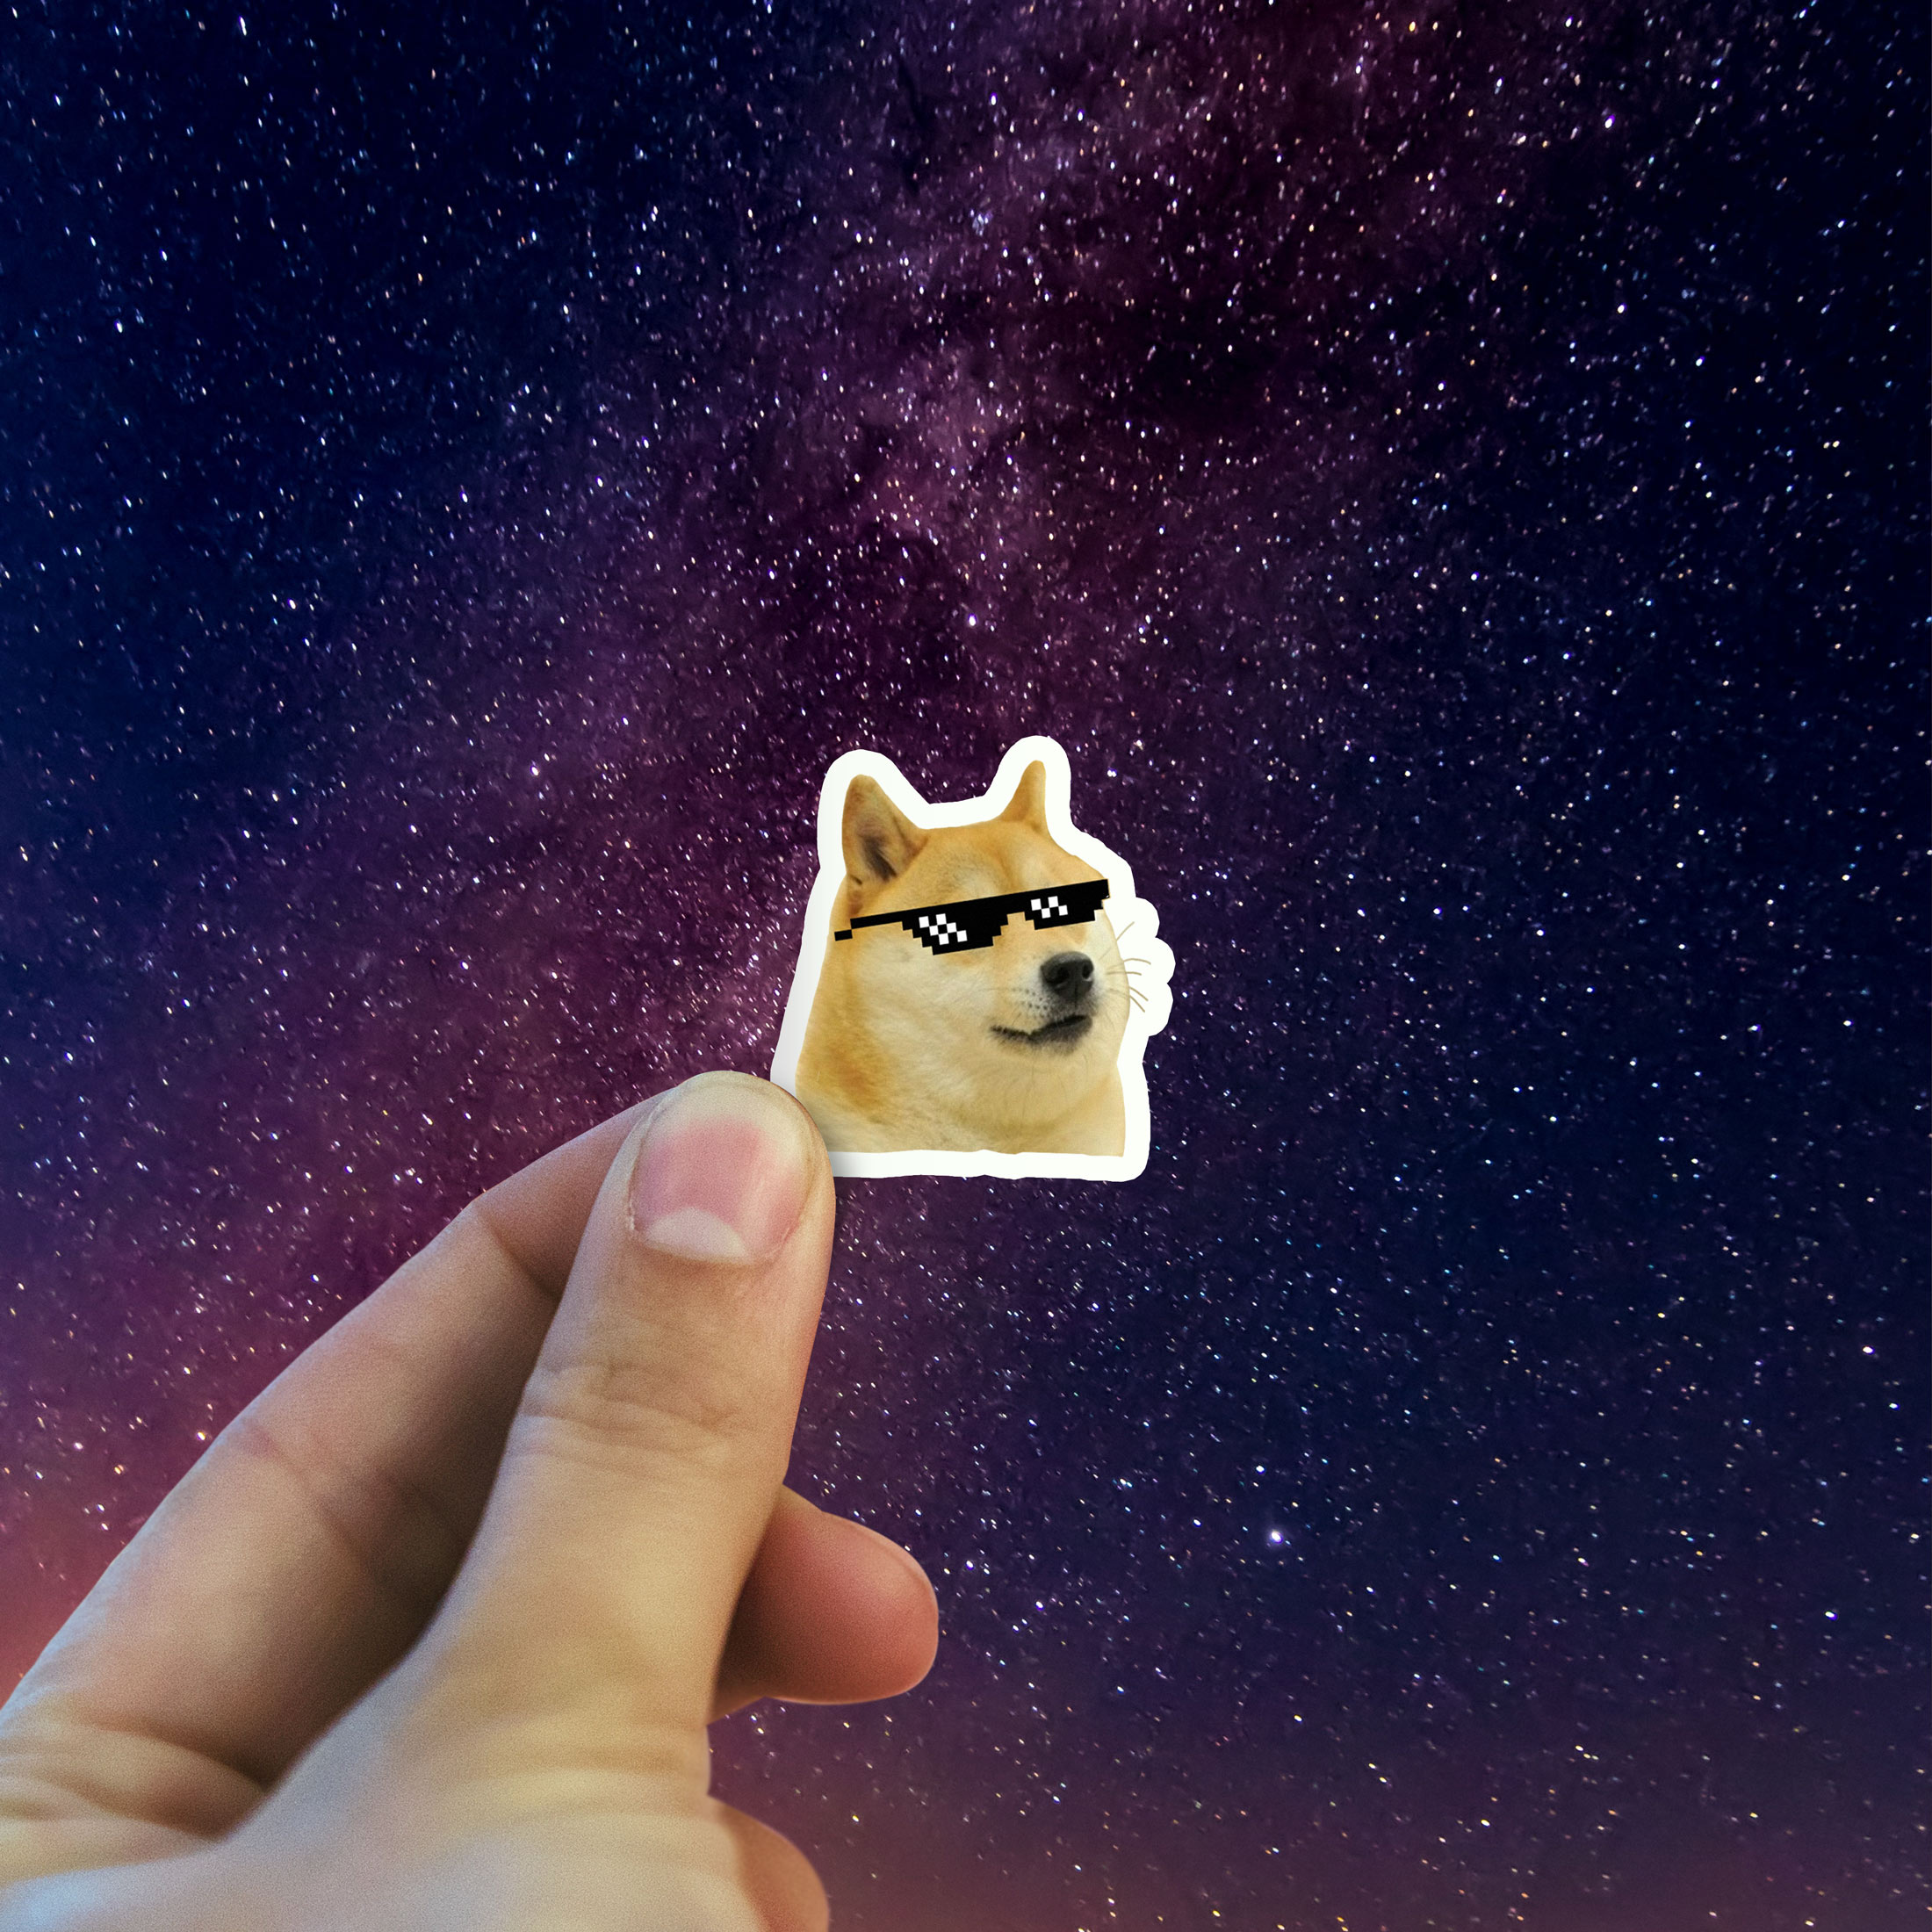 Dogecoin thug life sticker holding in hand